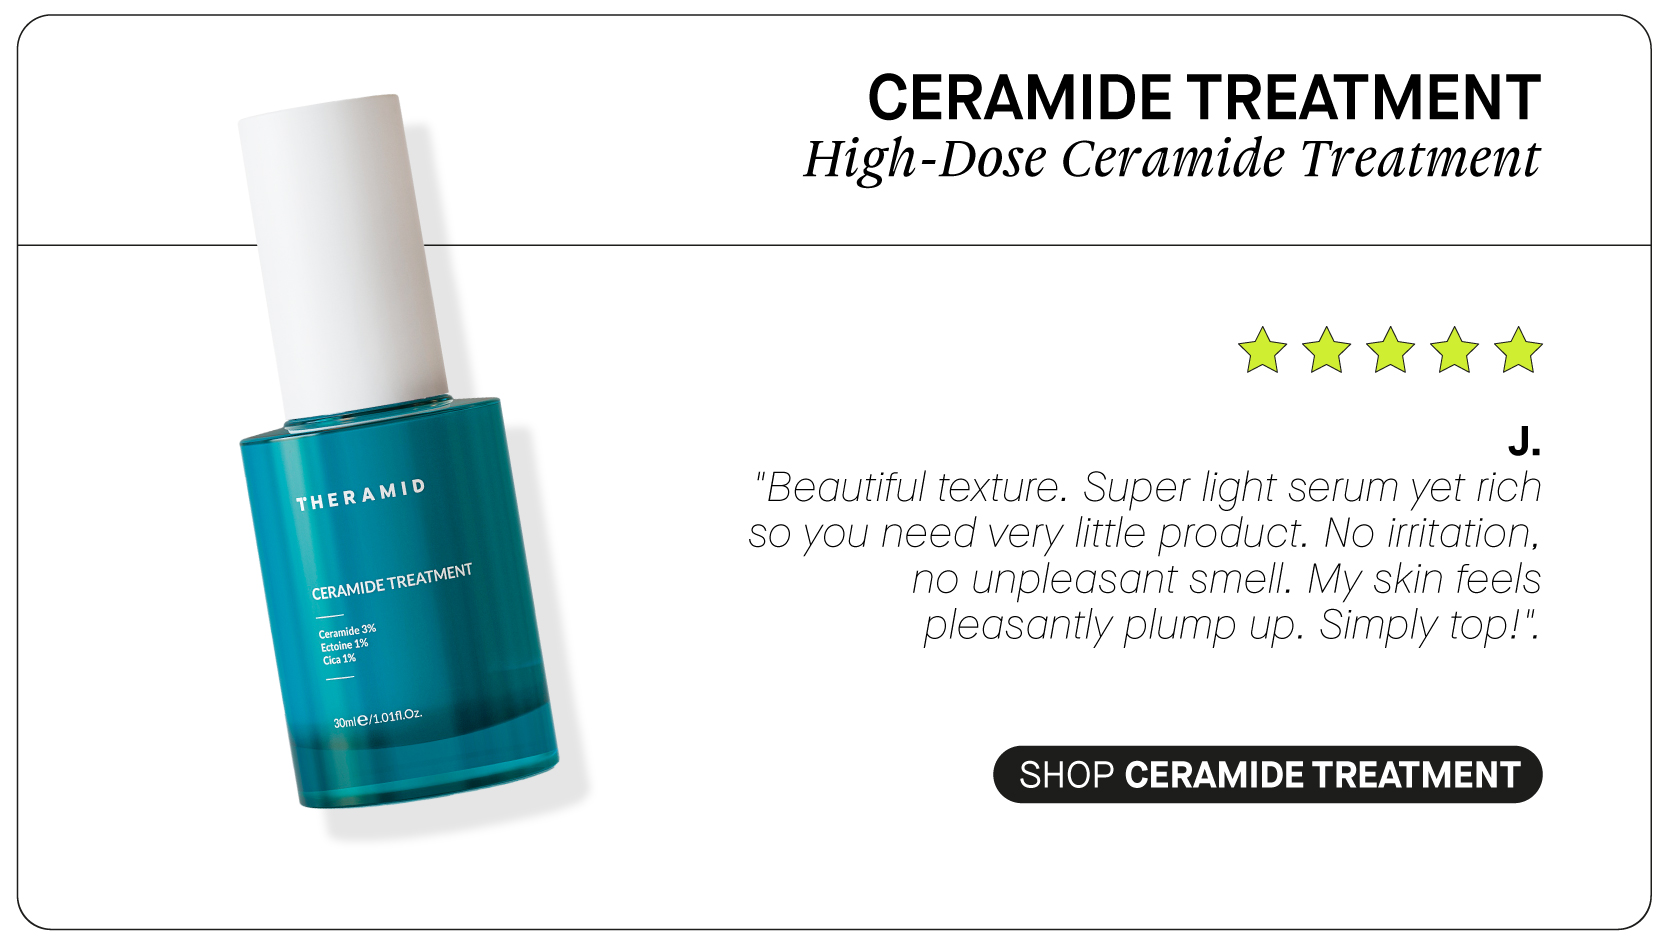  il CERAMIDE TREATMENT High-Dose Ceramide Treatment iAW J. "Beautiful texture. Super light serum yet rich SO you need very little product. No irritation, no unpleasant smell. My skin feels pleasantly plump up. Simply top!". SHOP CERAMIDE TREATMENT 